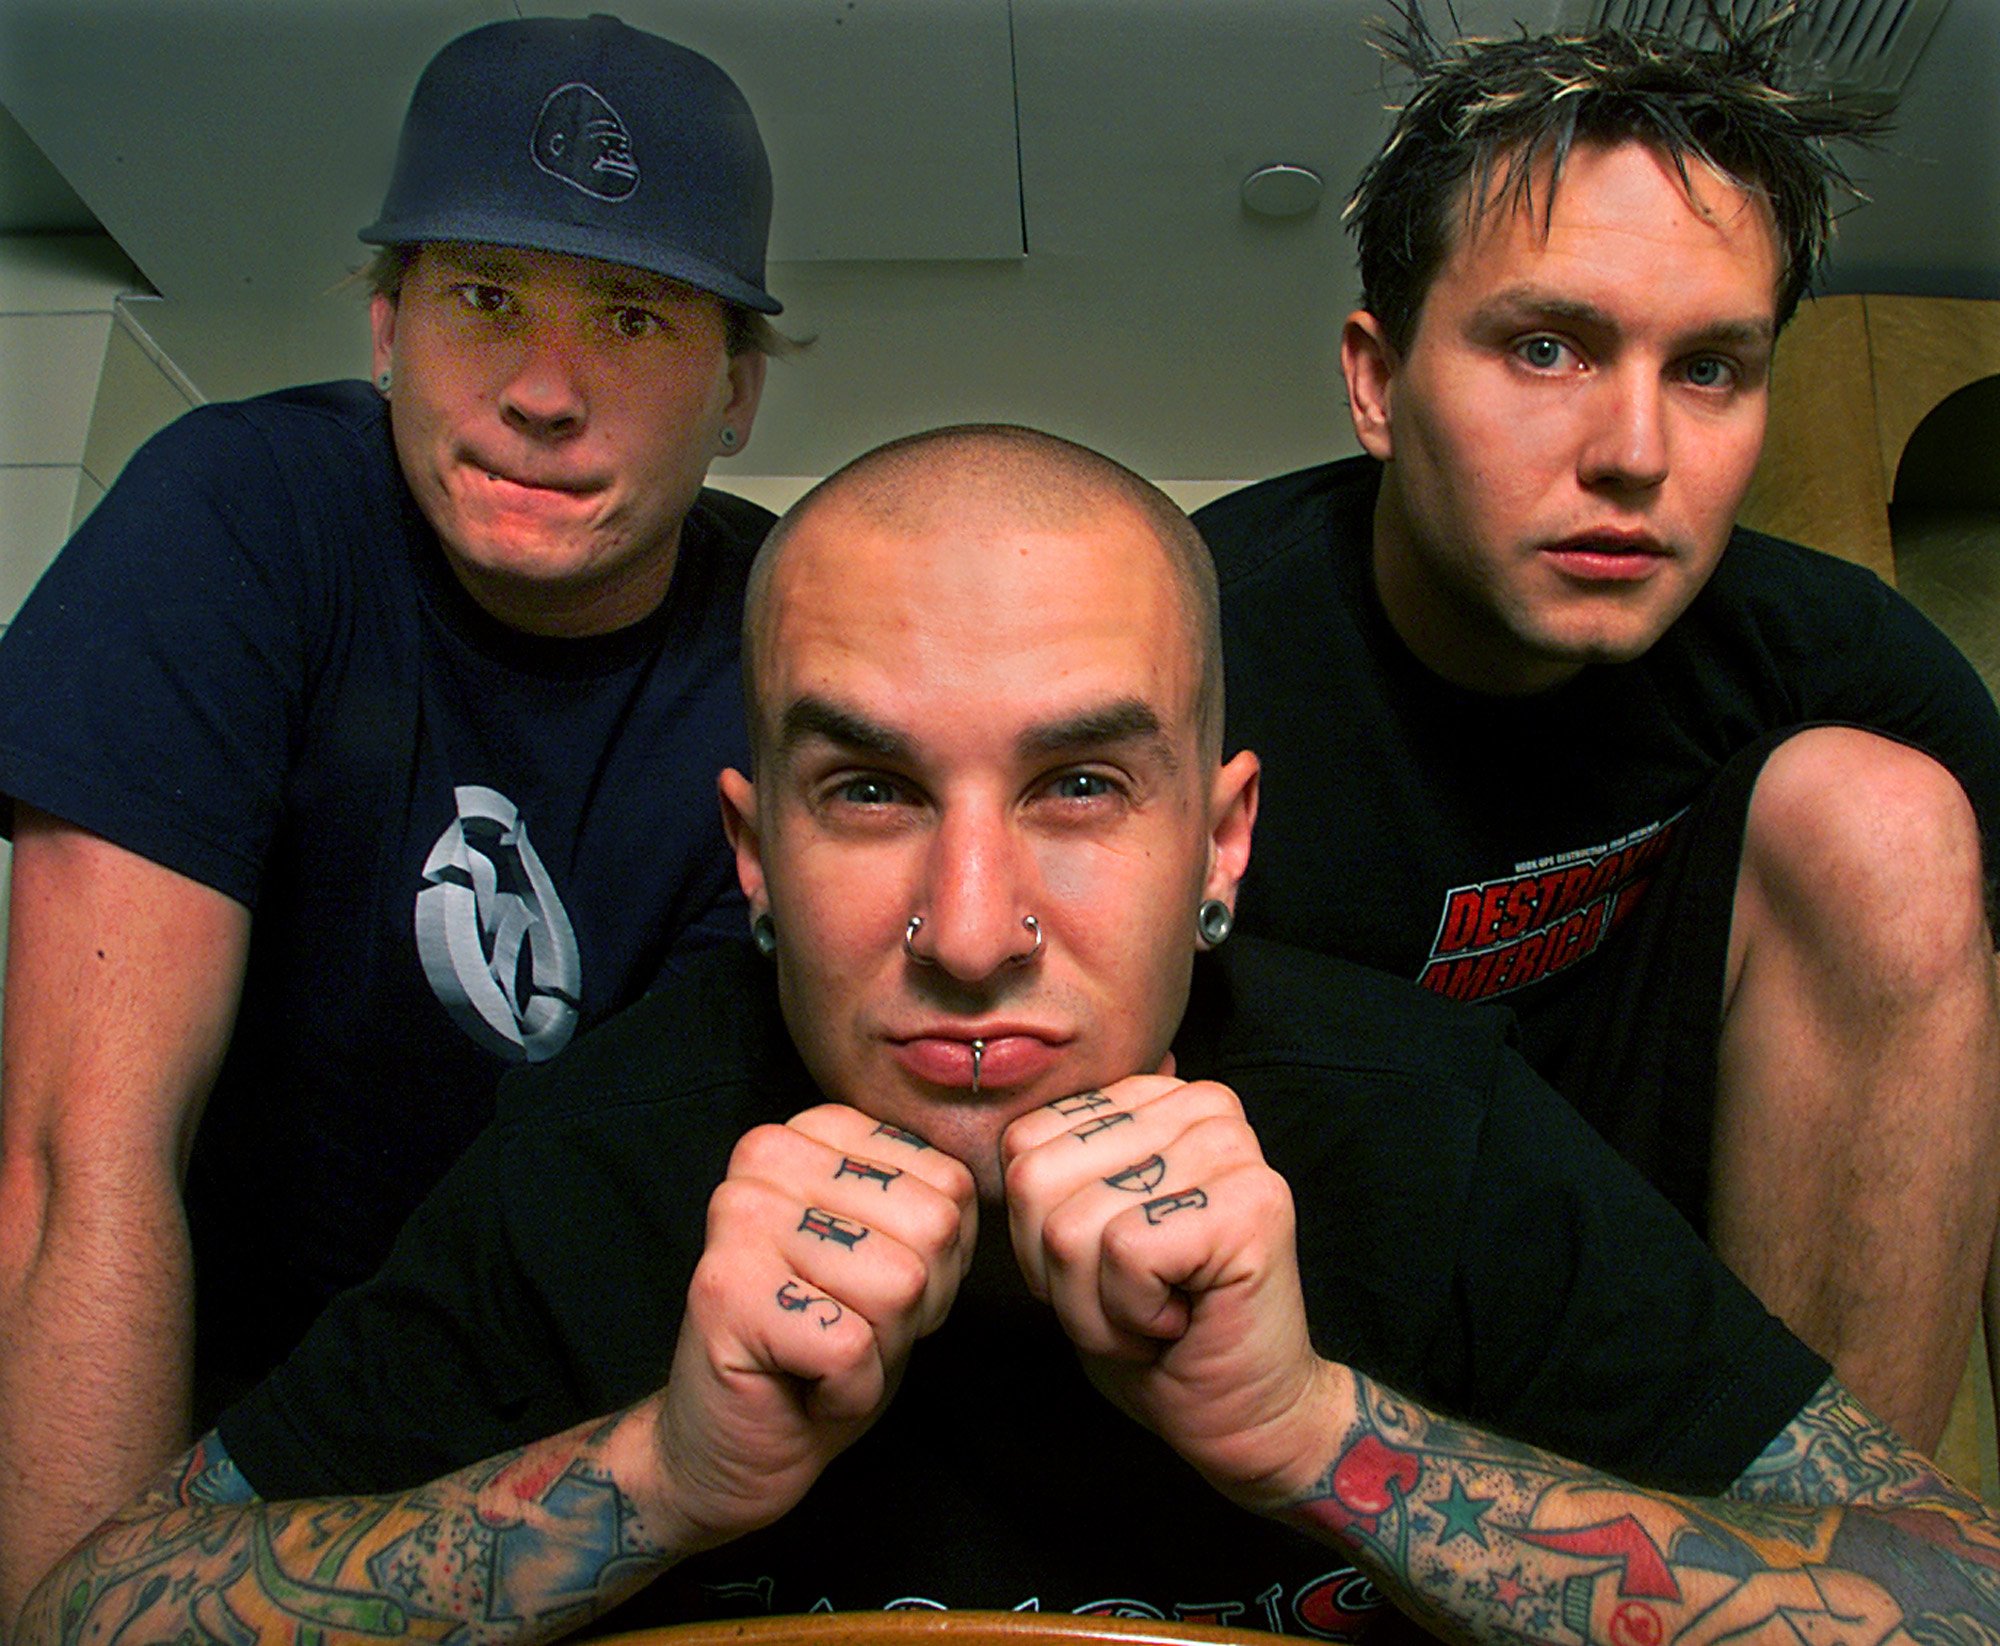 Blink-182 members Tom DeLonge, Travis Barker, and Mark Hoppus pose before their performance at the Hollywood Paladium in 2001. | Source: Getty Images